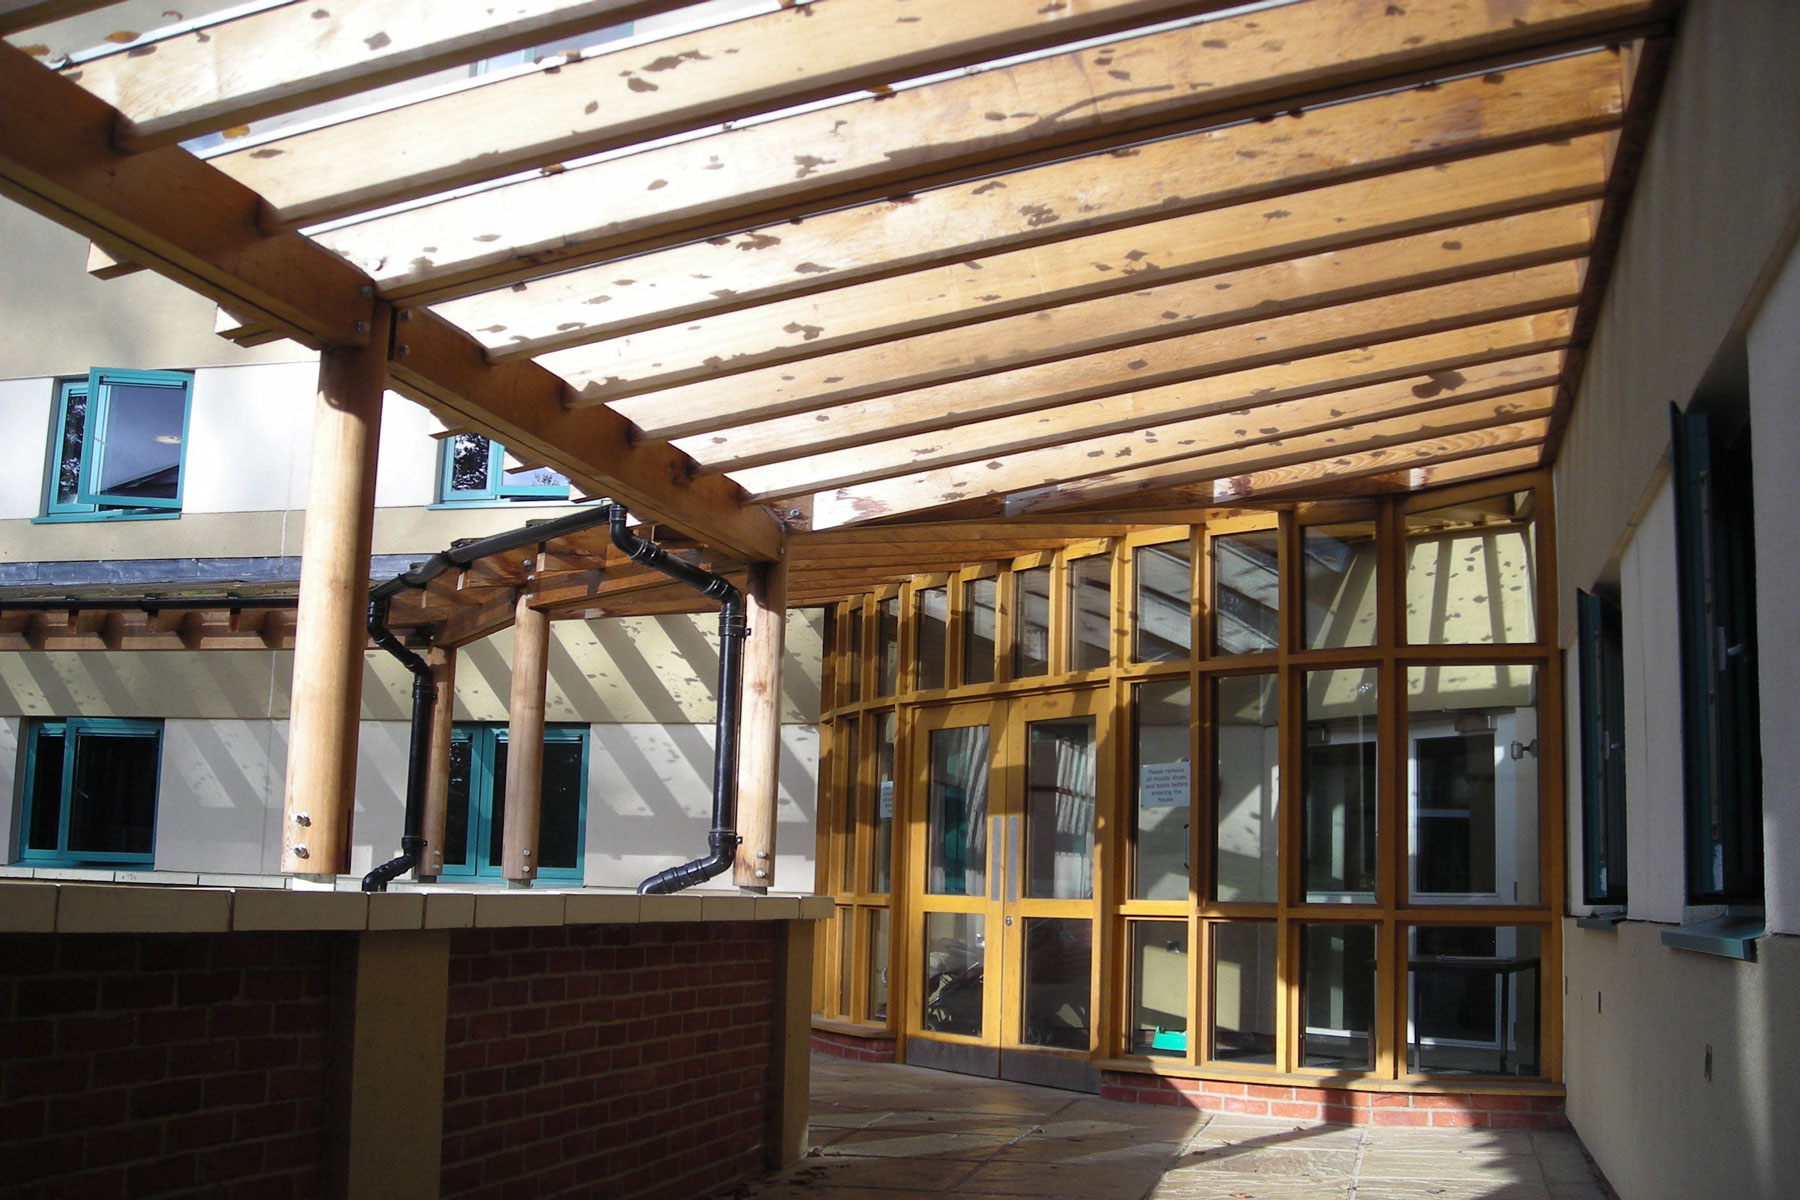 The Oratory School Boarding Houses - New Timber Frame Entrance and Cloister